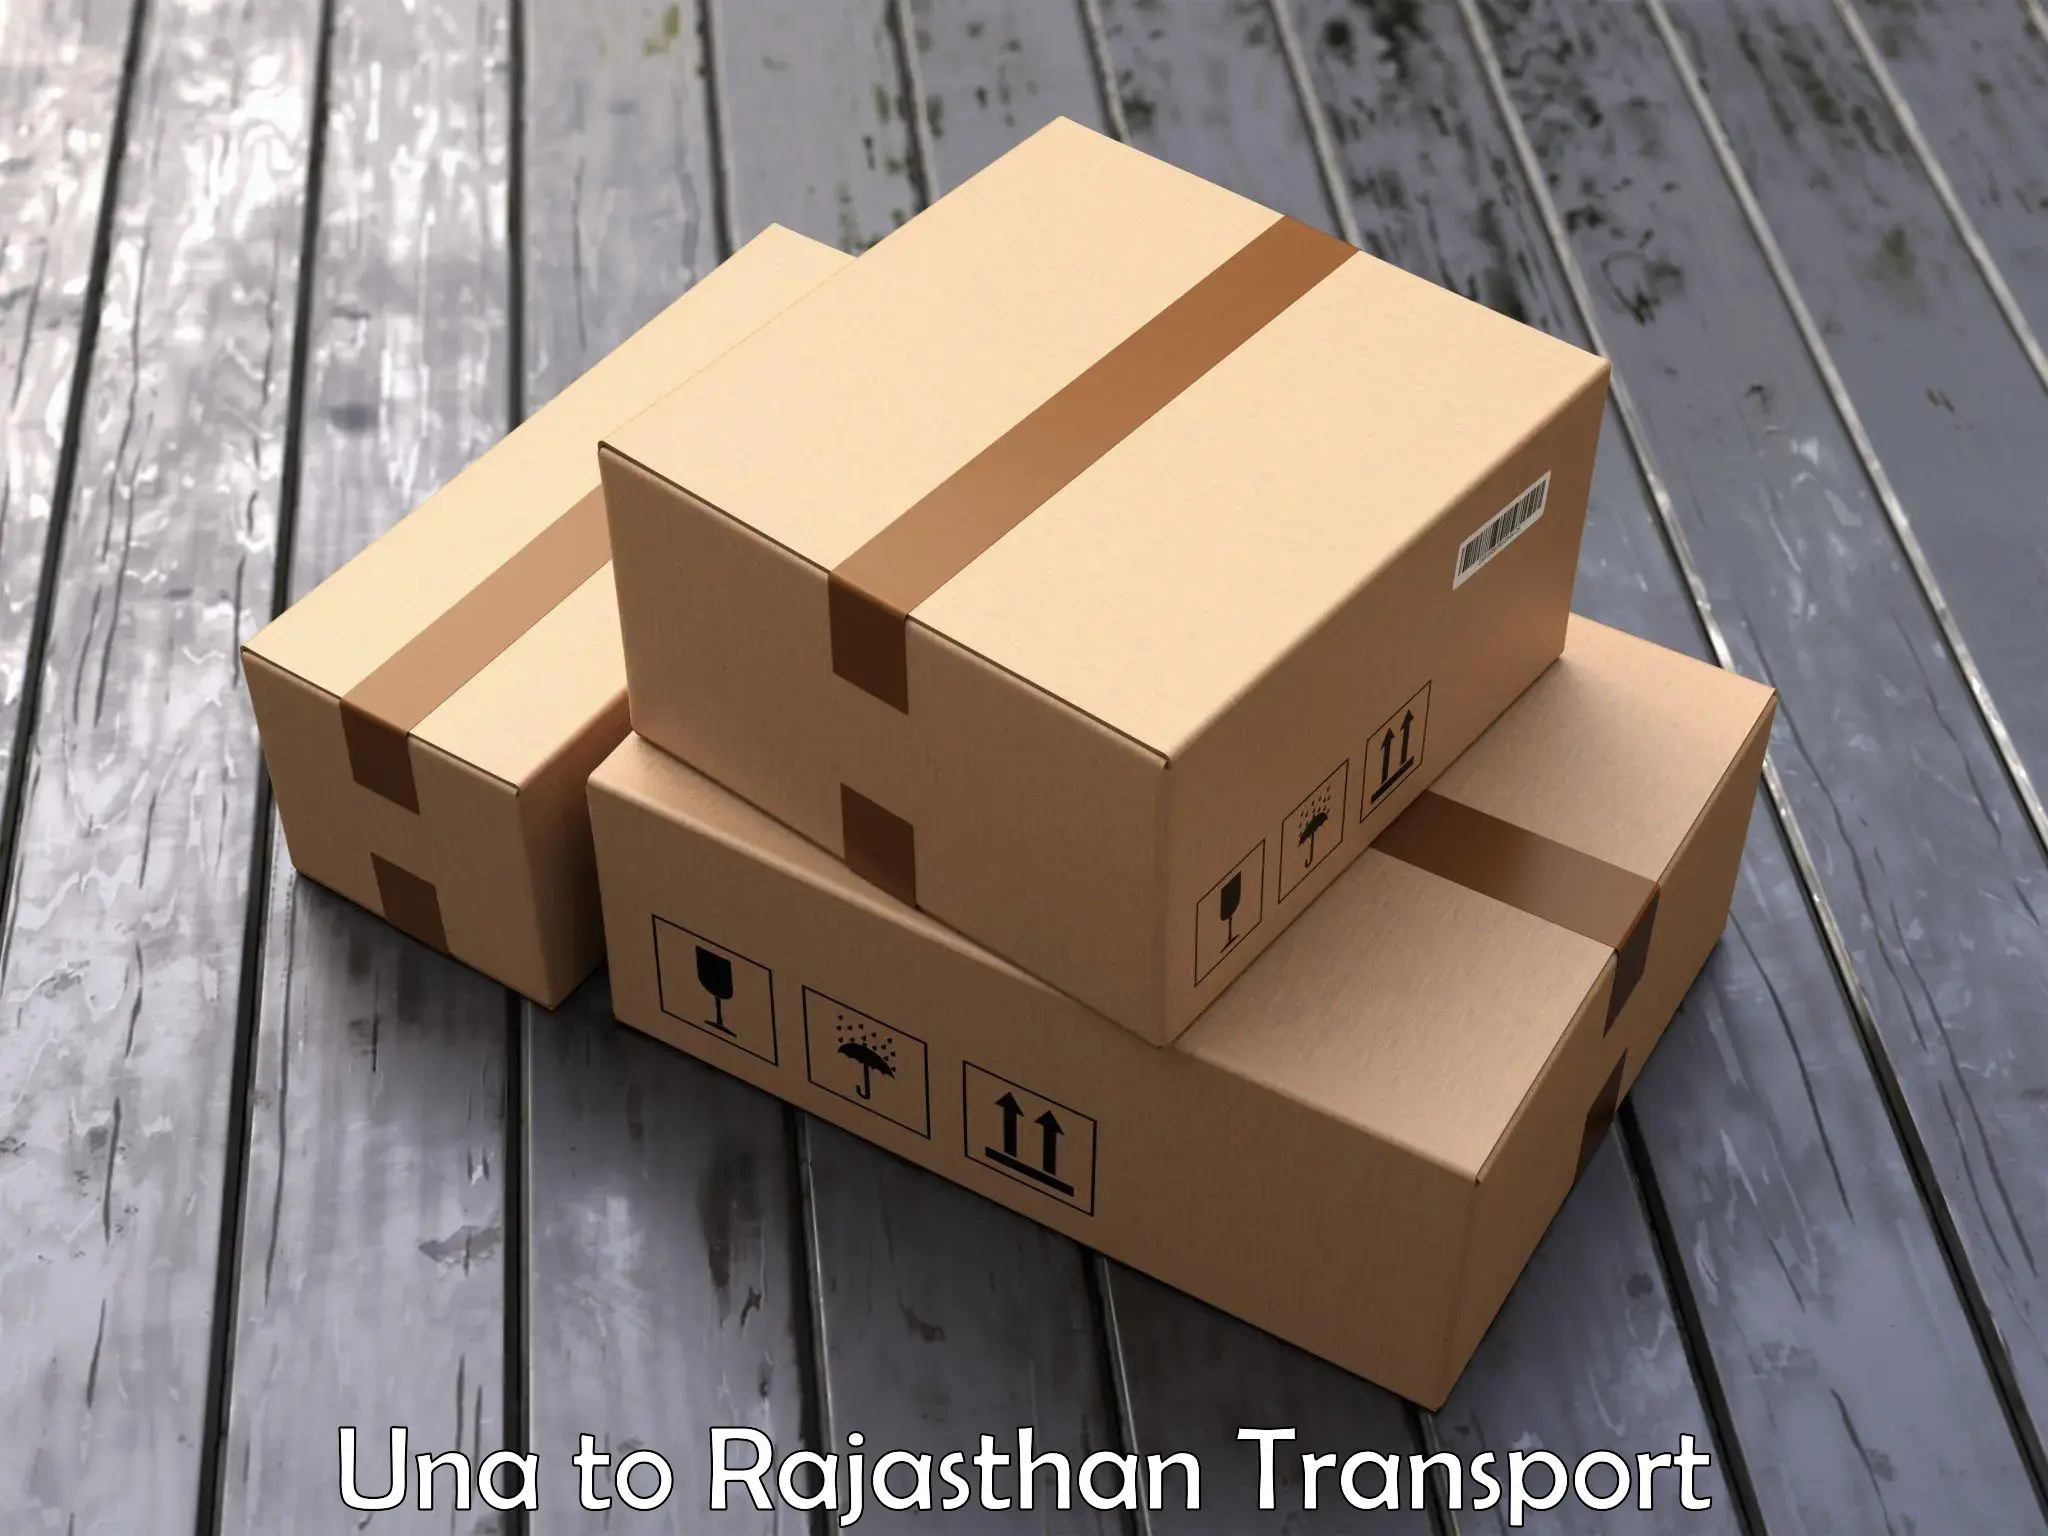 Vehicle transport services Una to Rajasthan